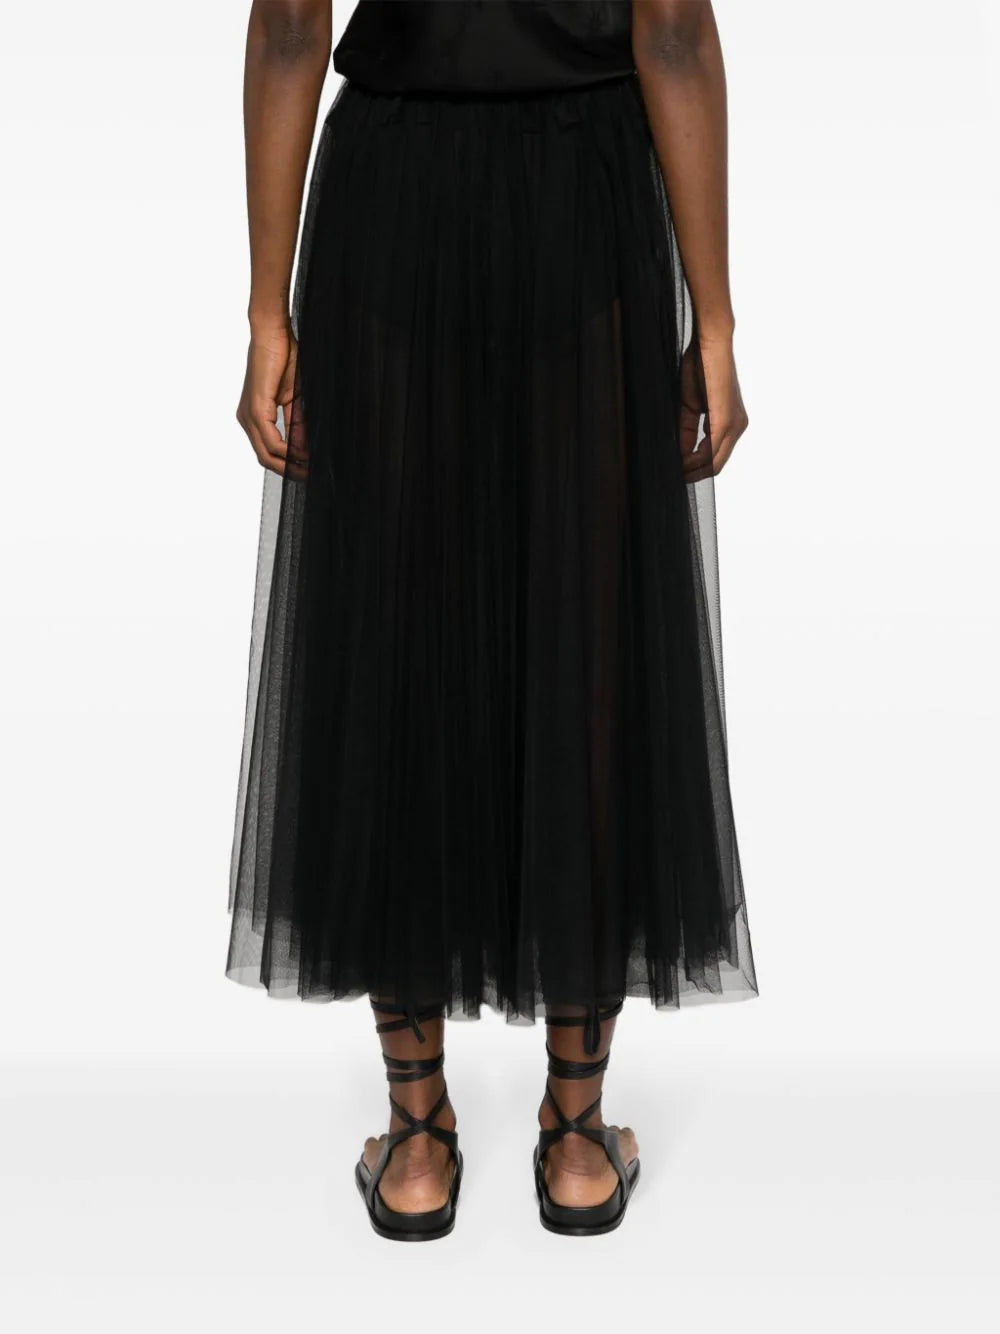 Chic tulle skirt with jersey coulotte, black